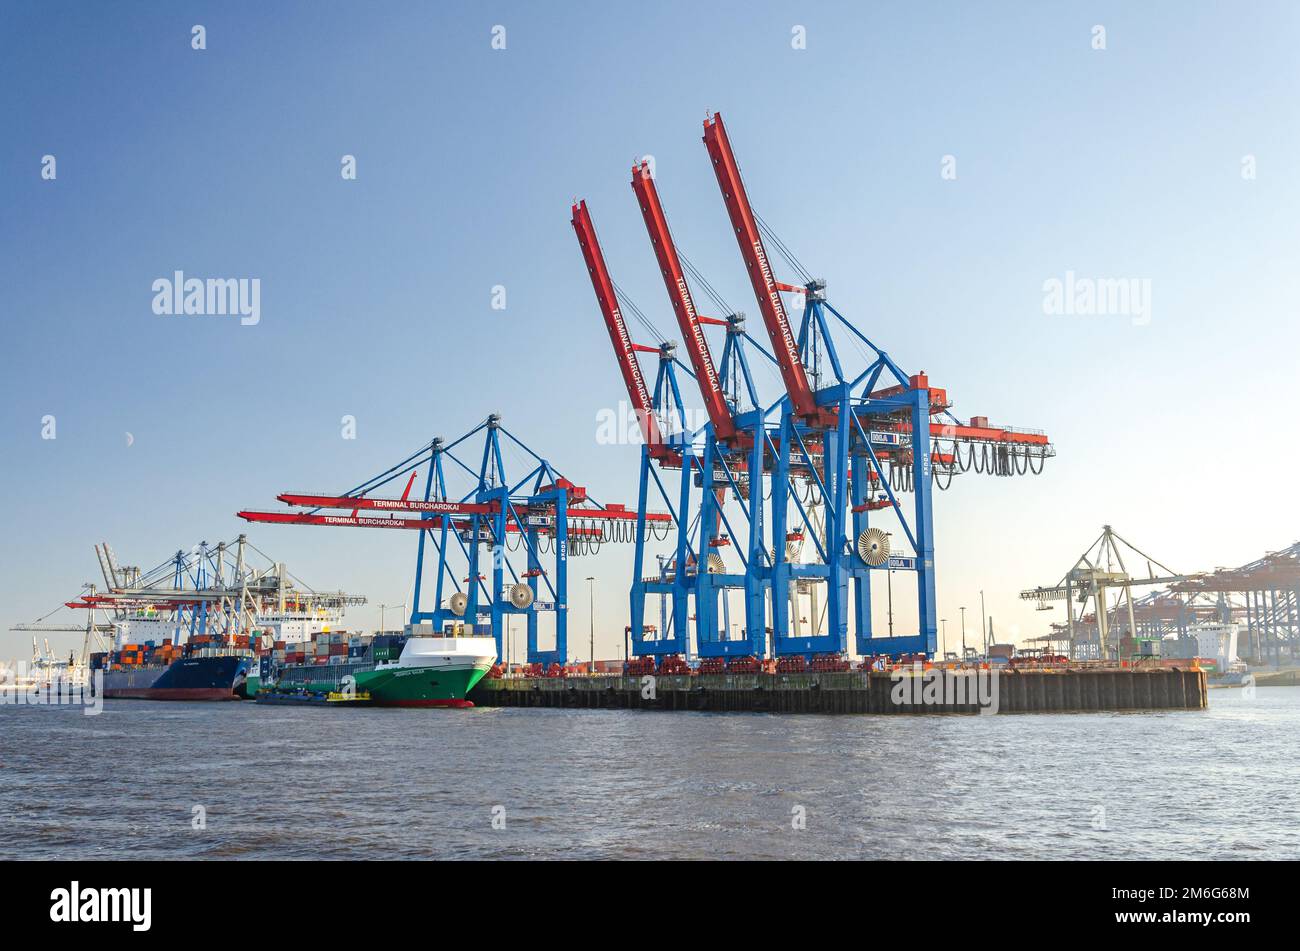 Container vessels and harbour facilities at a the Burchardkai container terminal in the port area of Hamburg, Germany Stock Photo